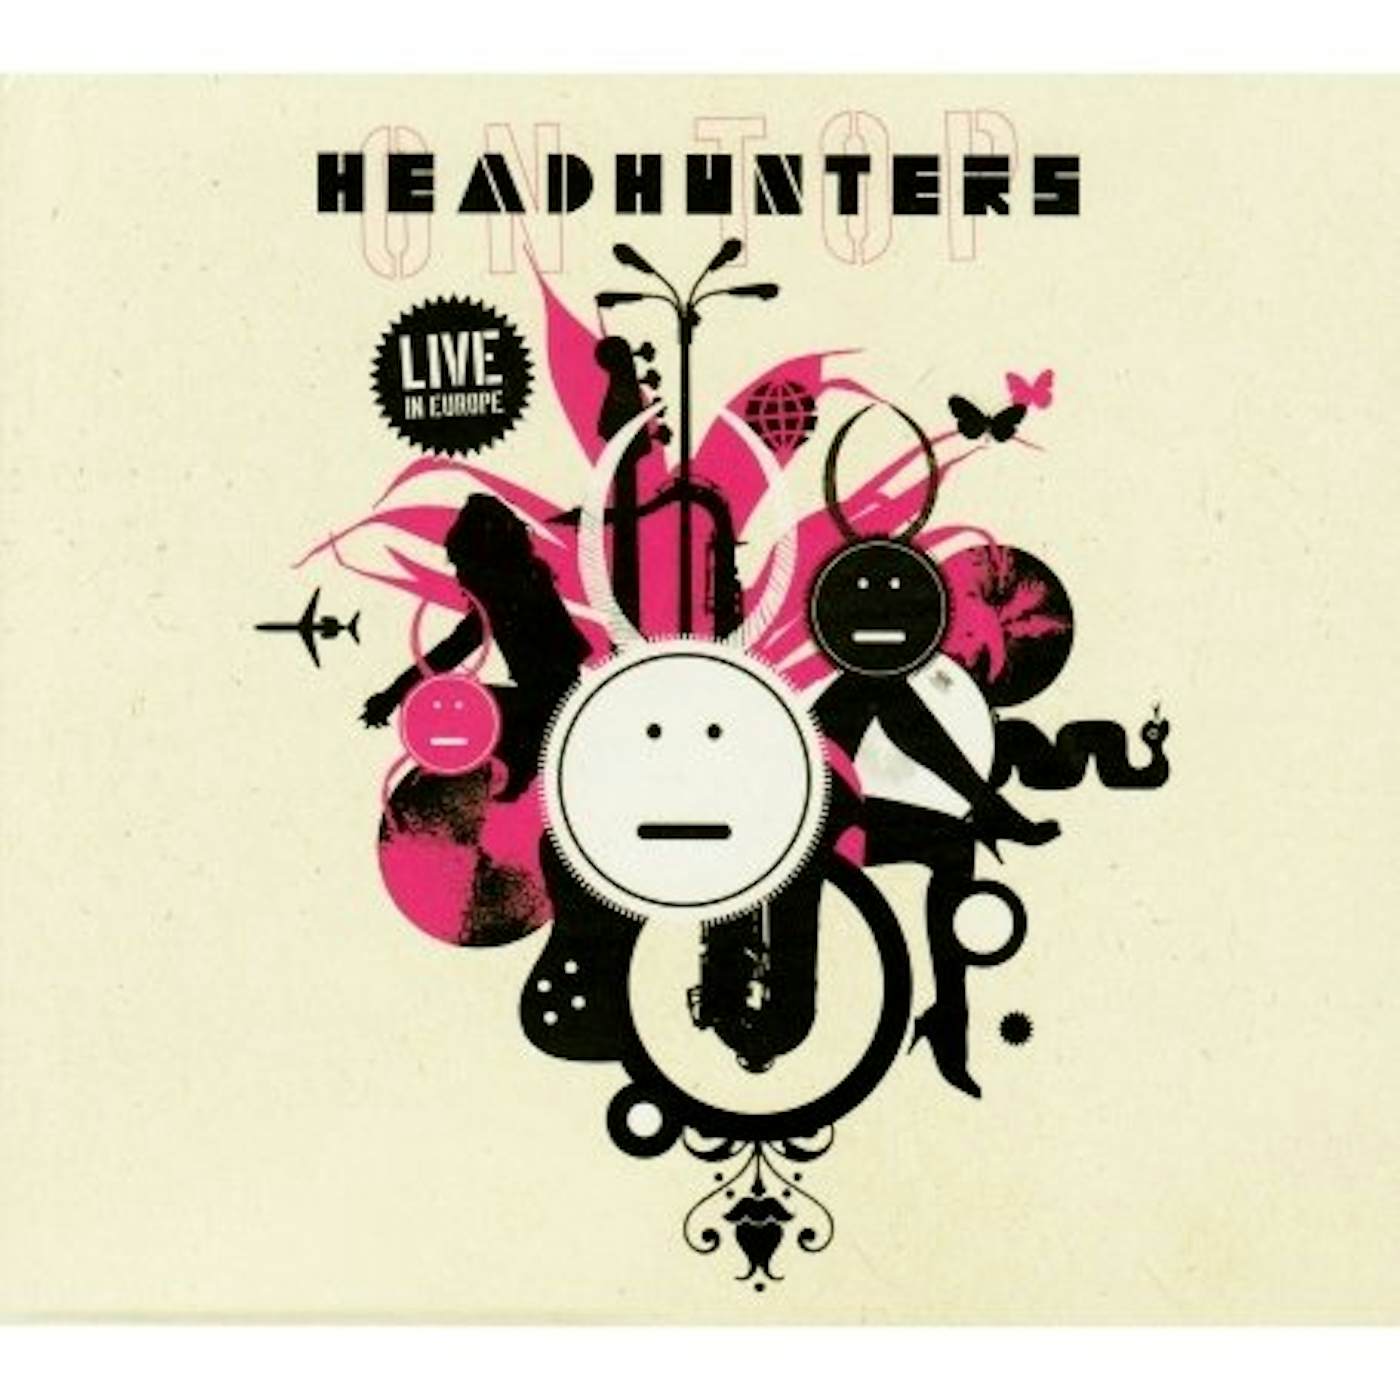 Headhunters ON TOP: LIVE IN EUROPE CD